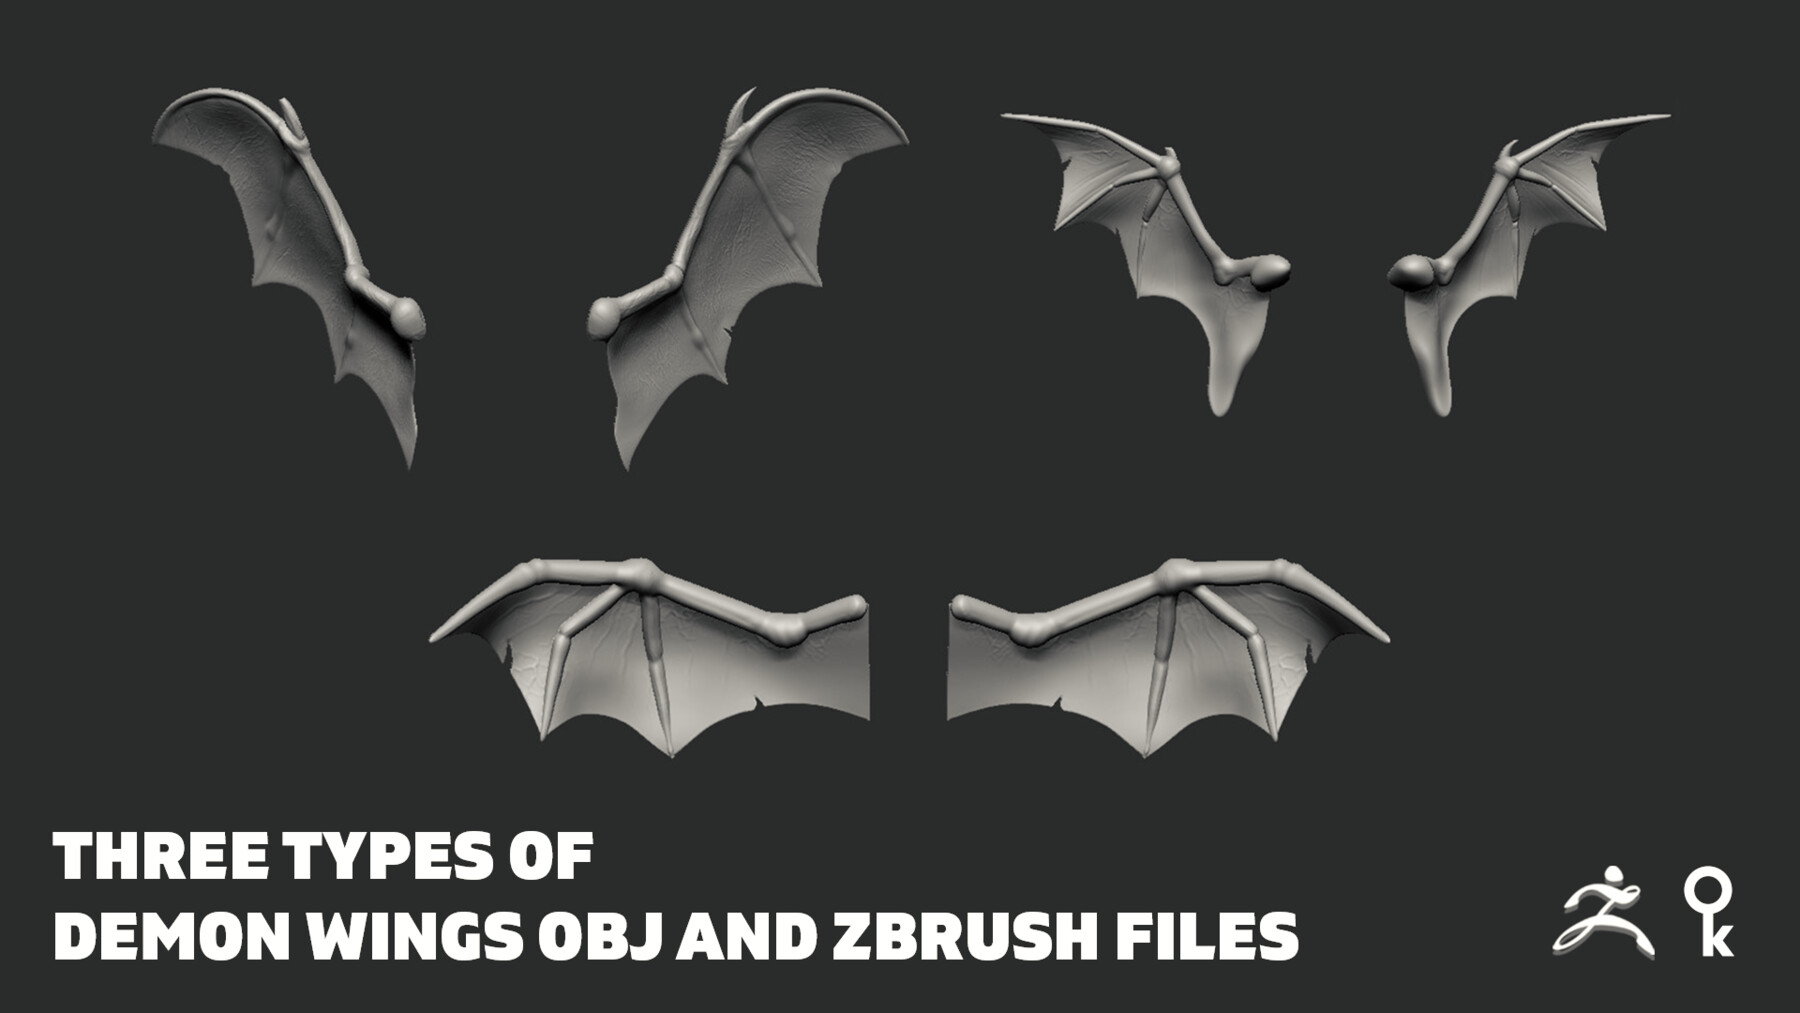 how to sculpt wings in zbrush